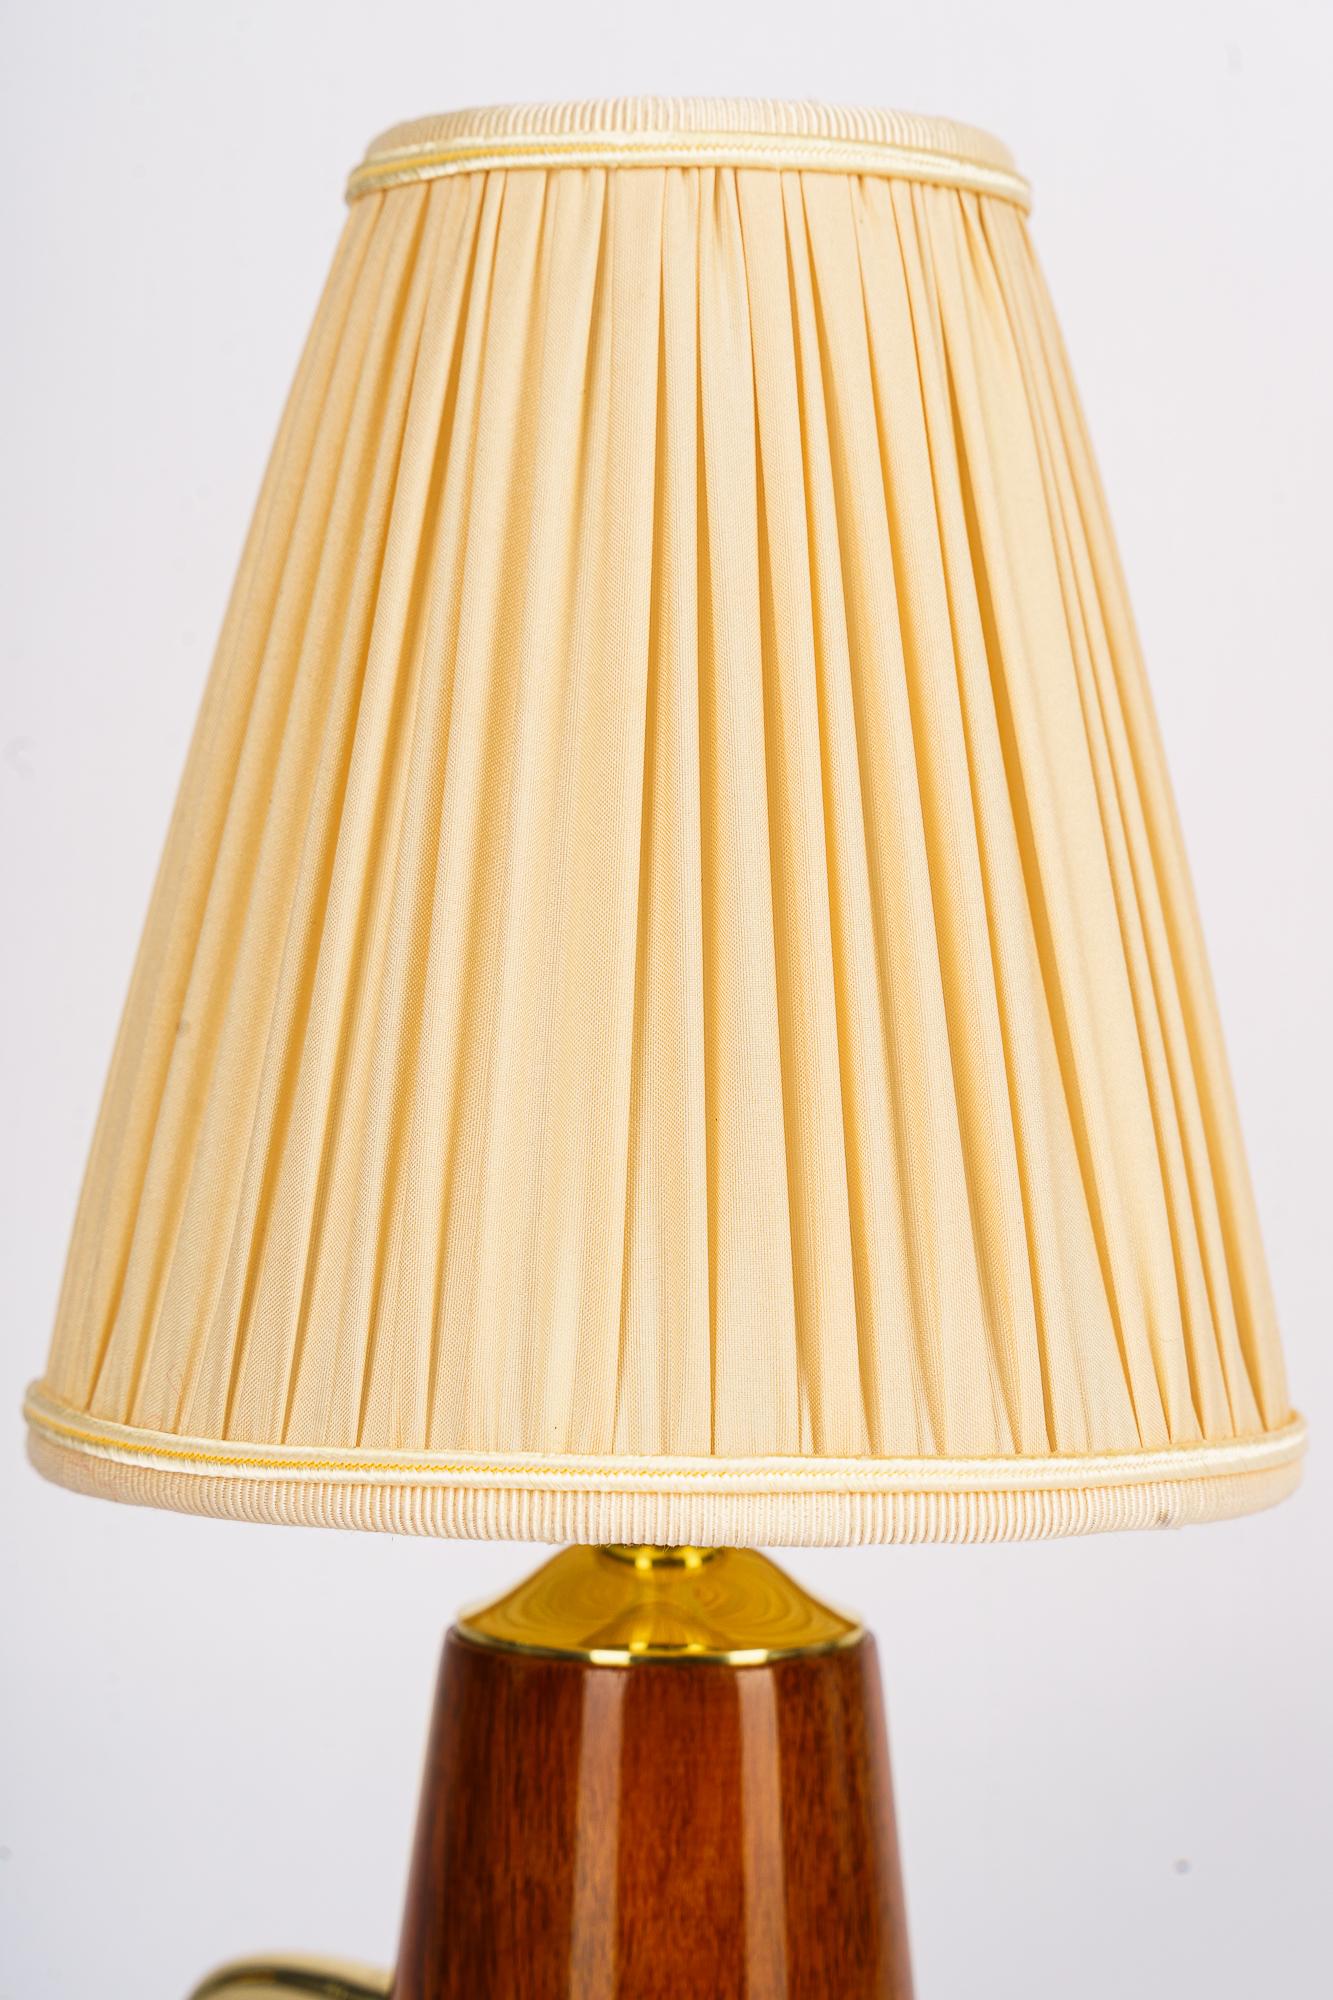 Rupert nikoll cherry wood table lamp with fabric shade vienna around 1950s In Good Condition For Sale In Wien, AT